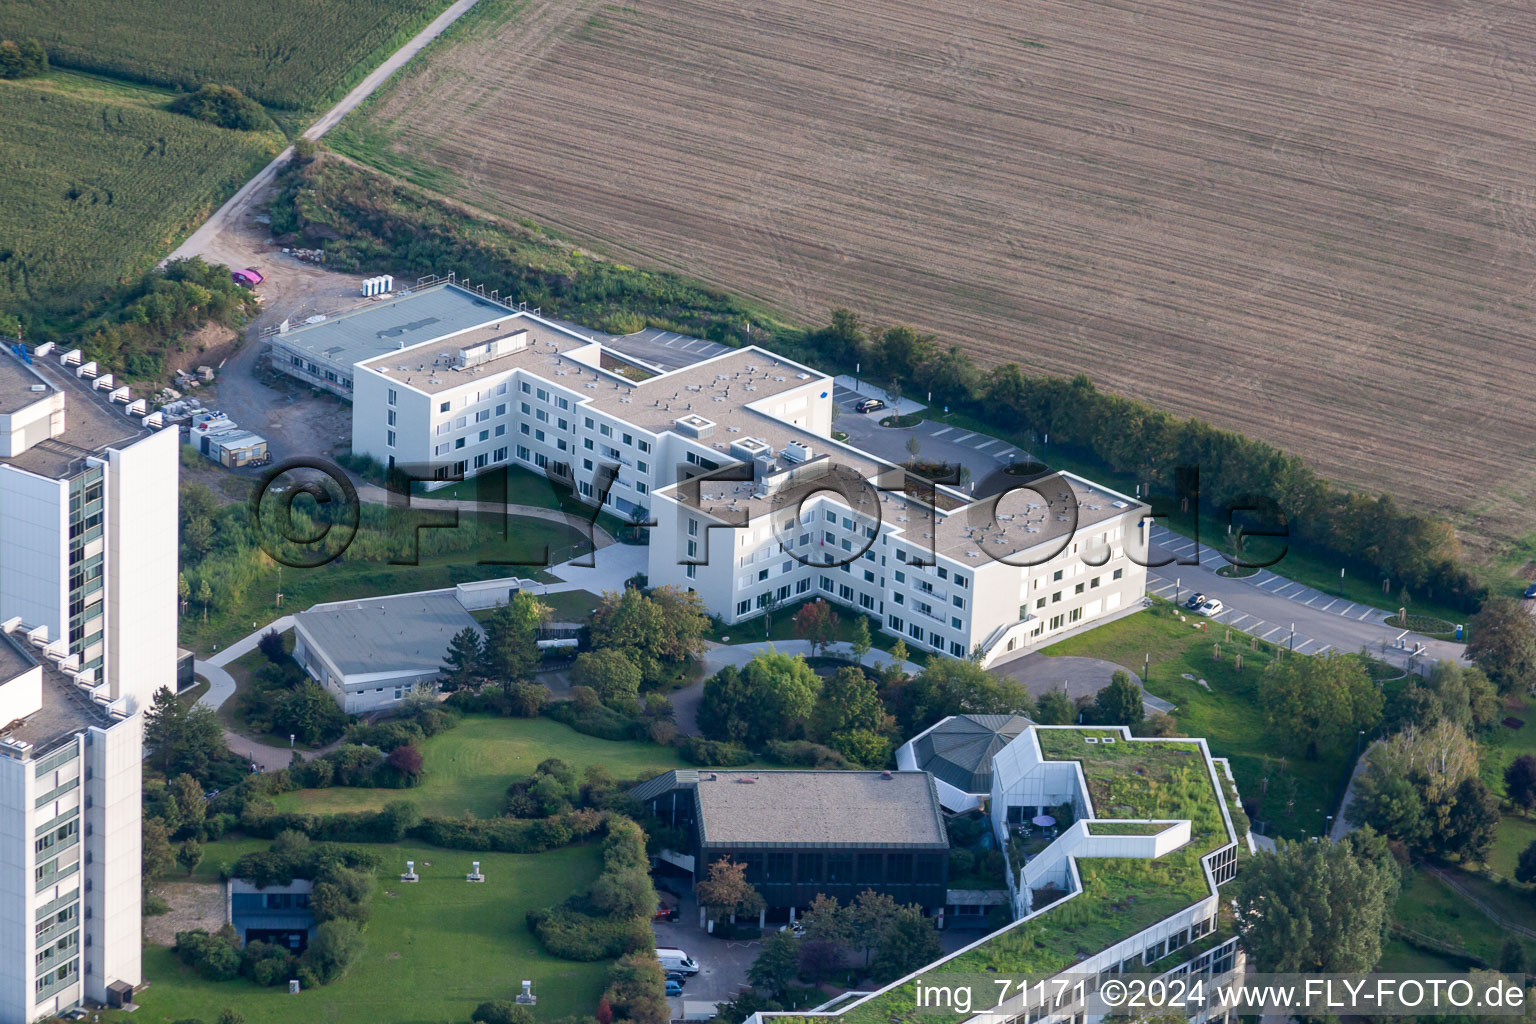 BG accident clinic in the district Oggersheim in Ludwigshafen am Rhein in the state Rhineland-Palatinate, Germany from the drone perspective